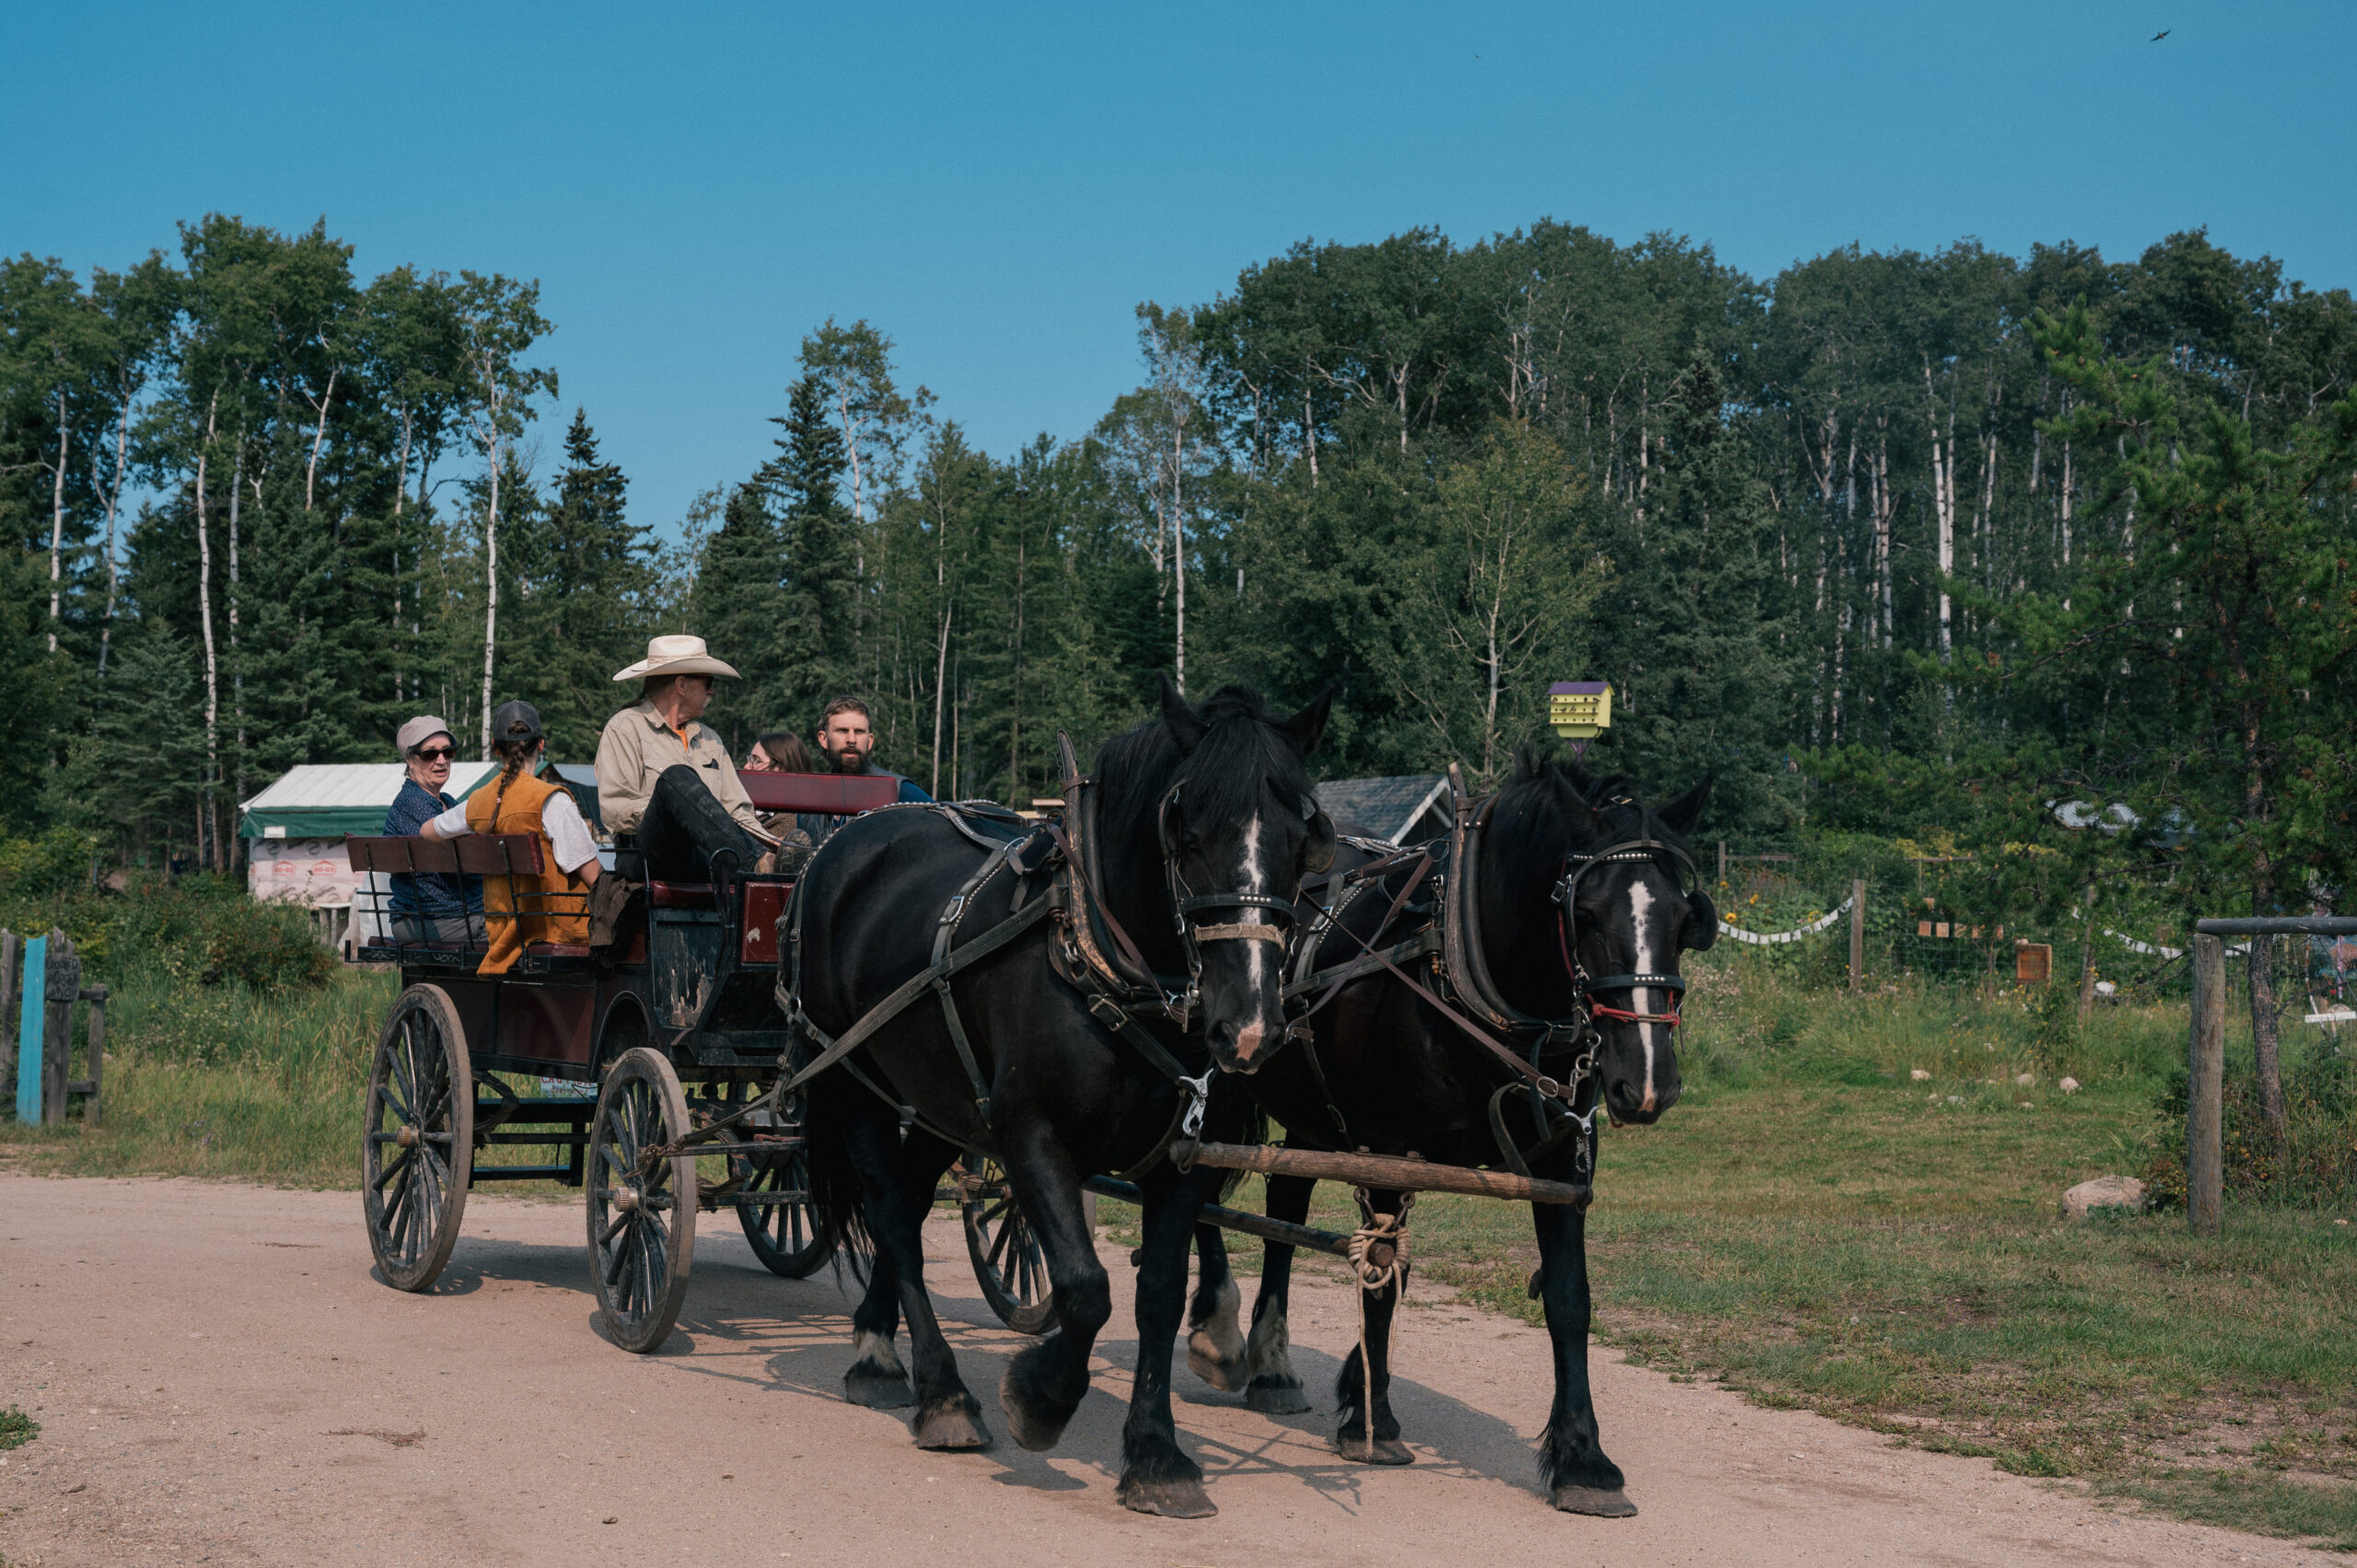 Horse drawn wagon rides were a highlight for many